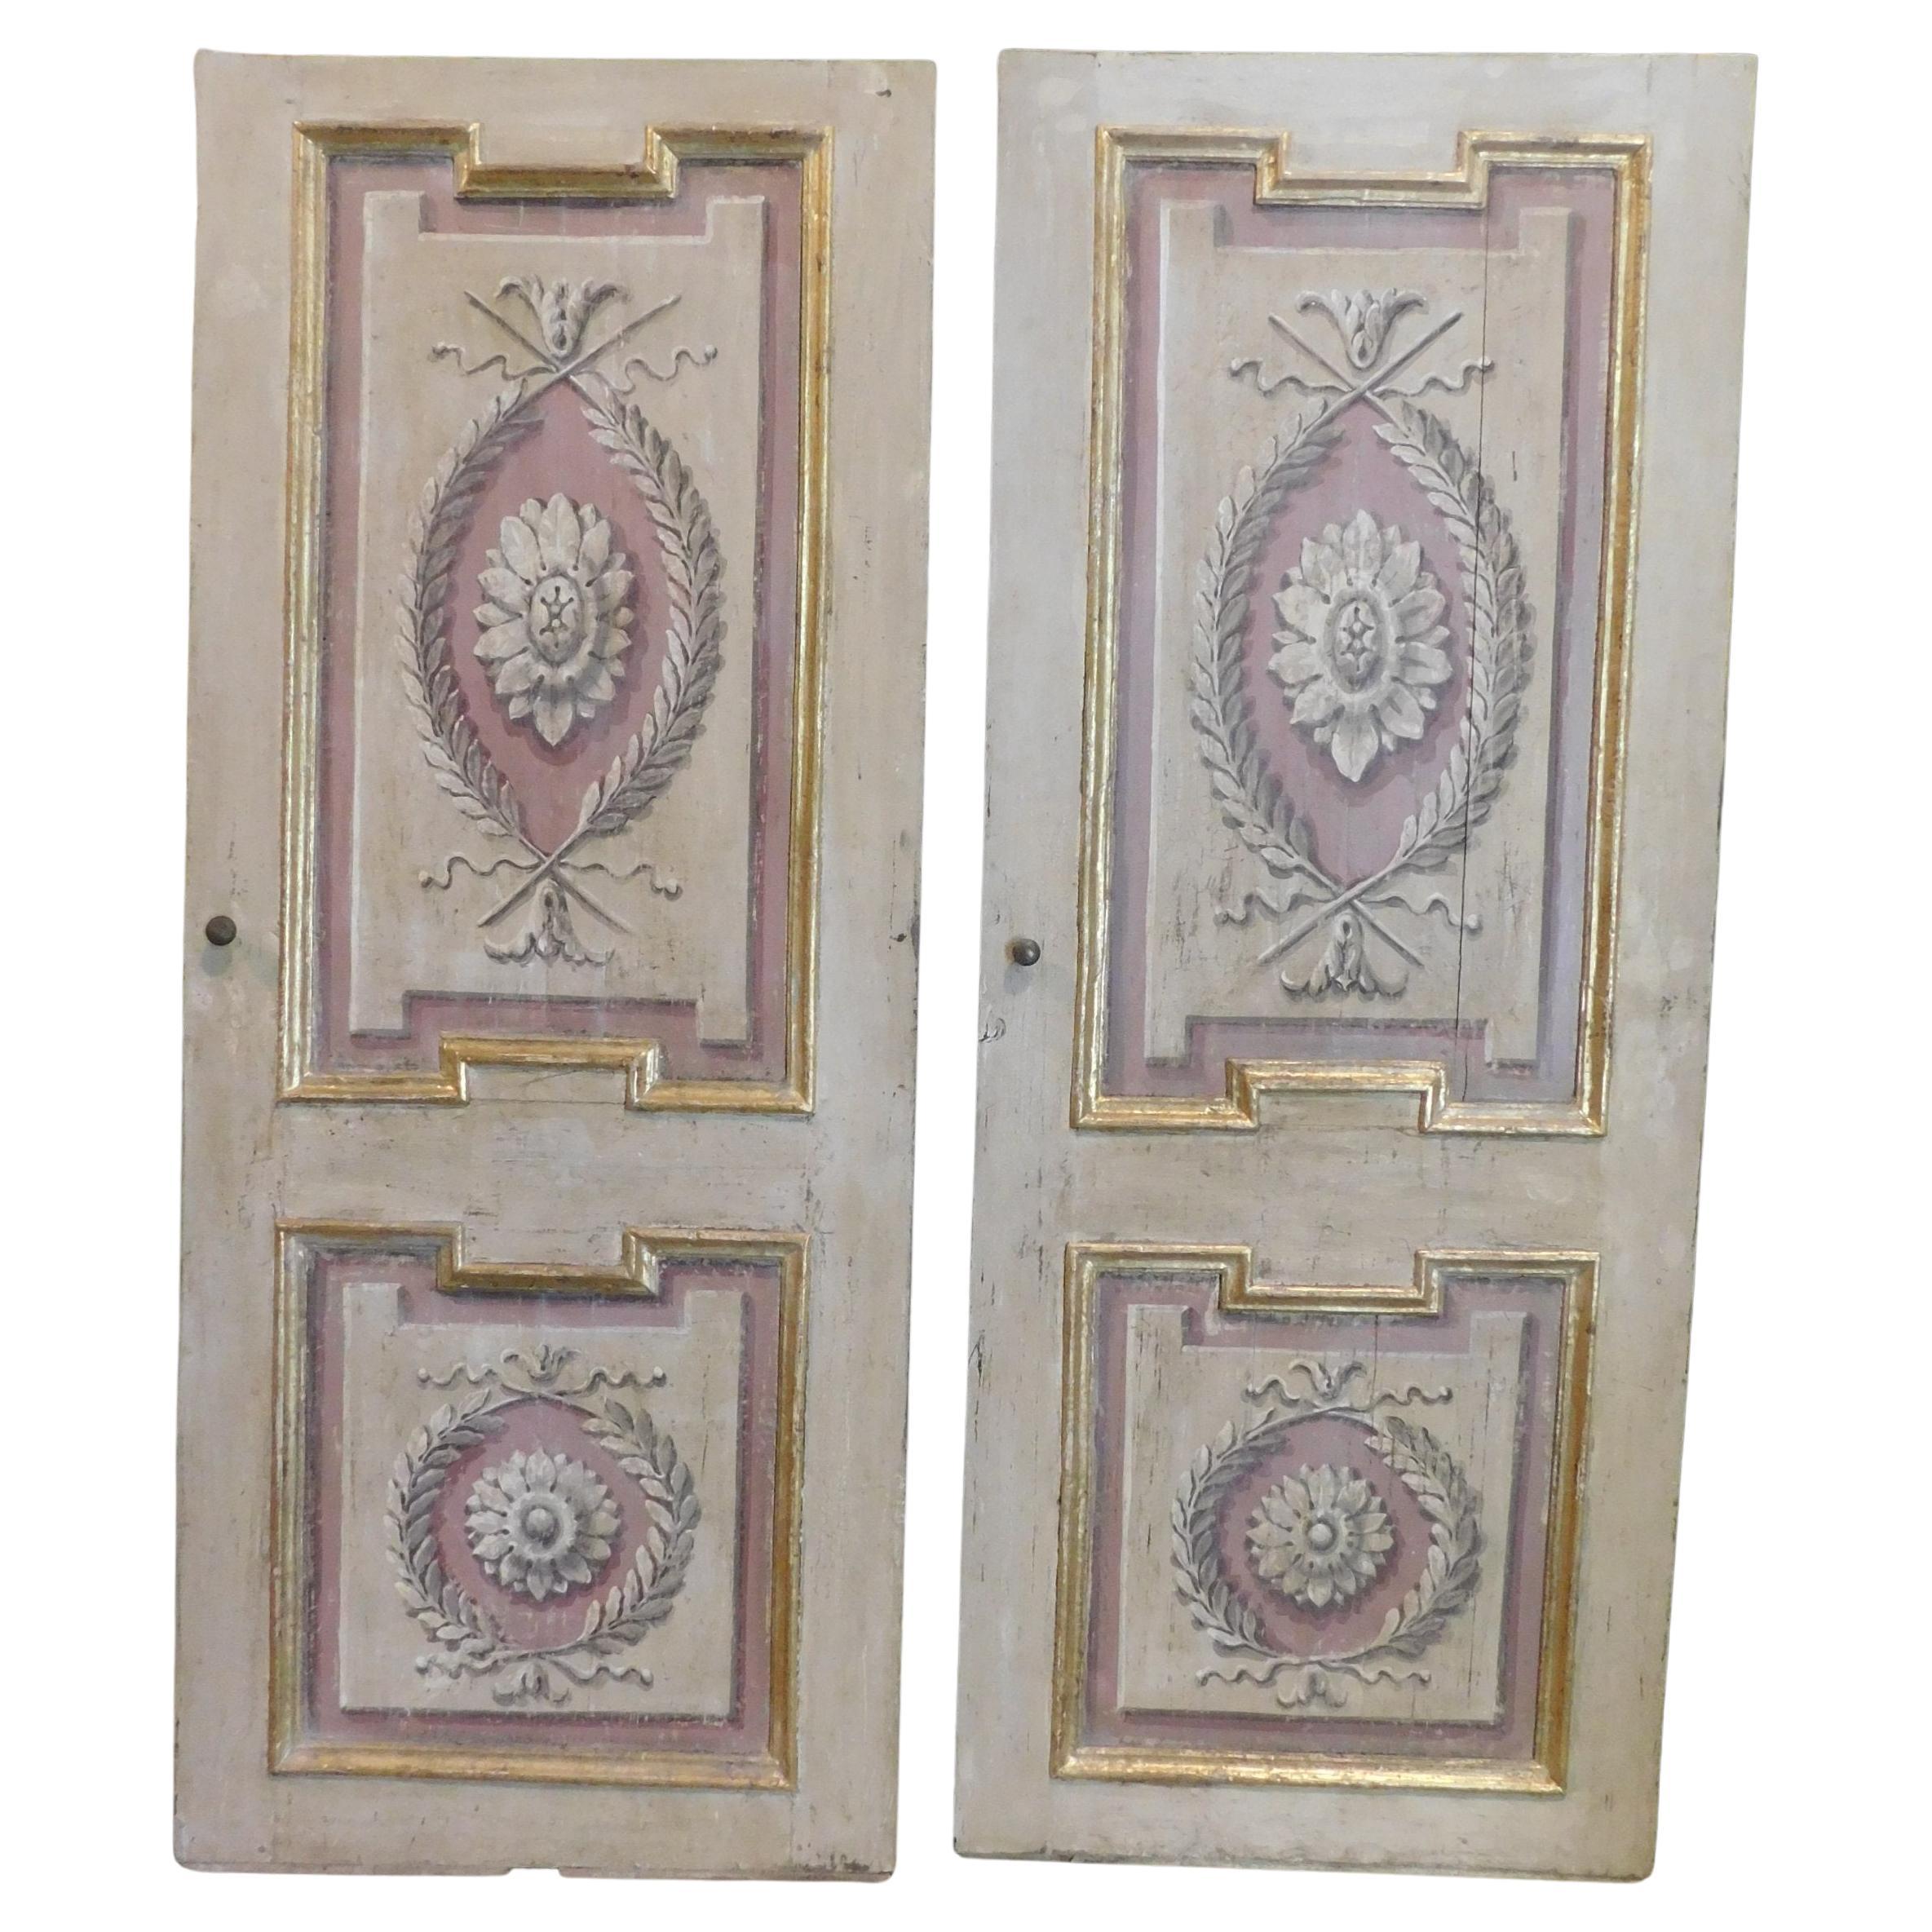 Pair of Old Painted and Gilded Wooden Doors, Florence, 'Italy', '700